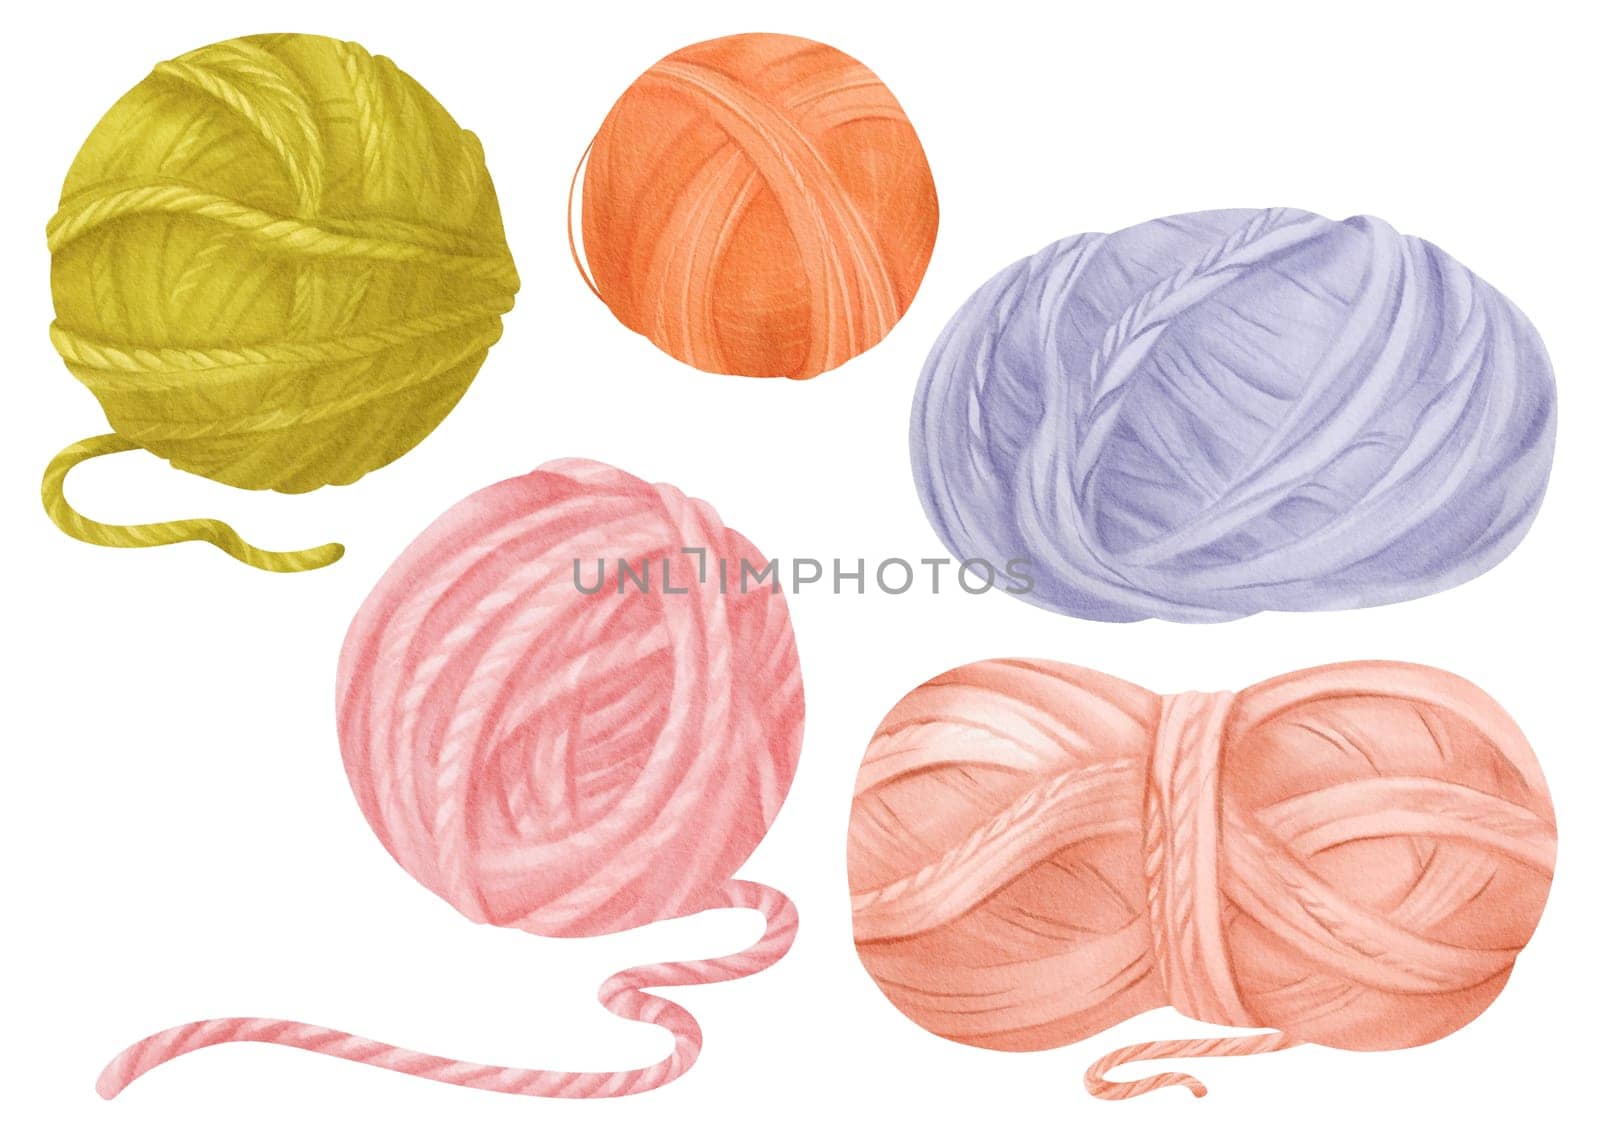 Watercolor set of knitting yarn balls. Isolated objects featuring cotton and wool threads in orange, green, blue, and pink colors. for crafting enthusiasts, knitting tutorials and needlework shops.